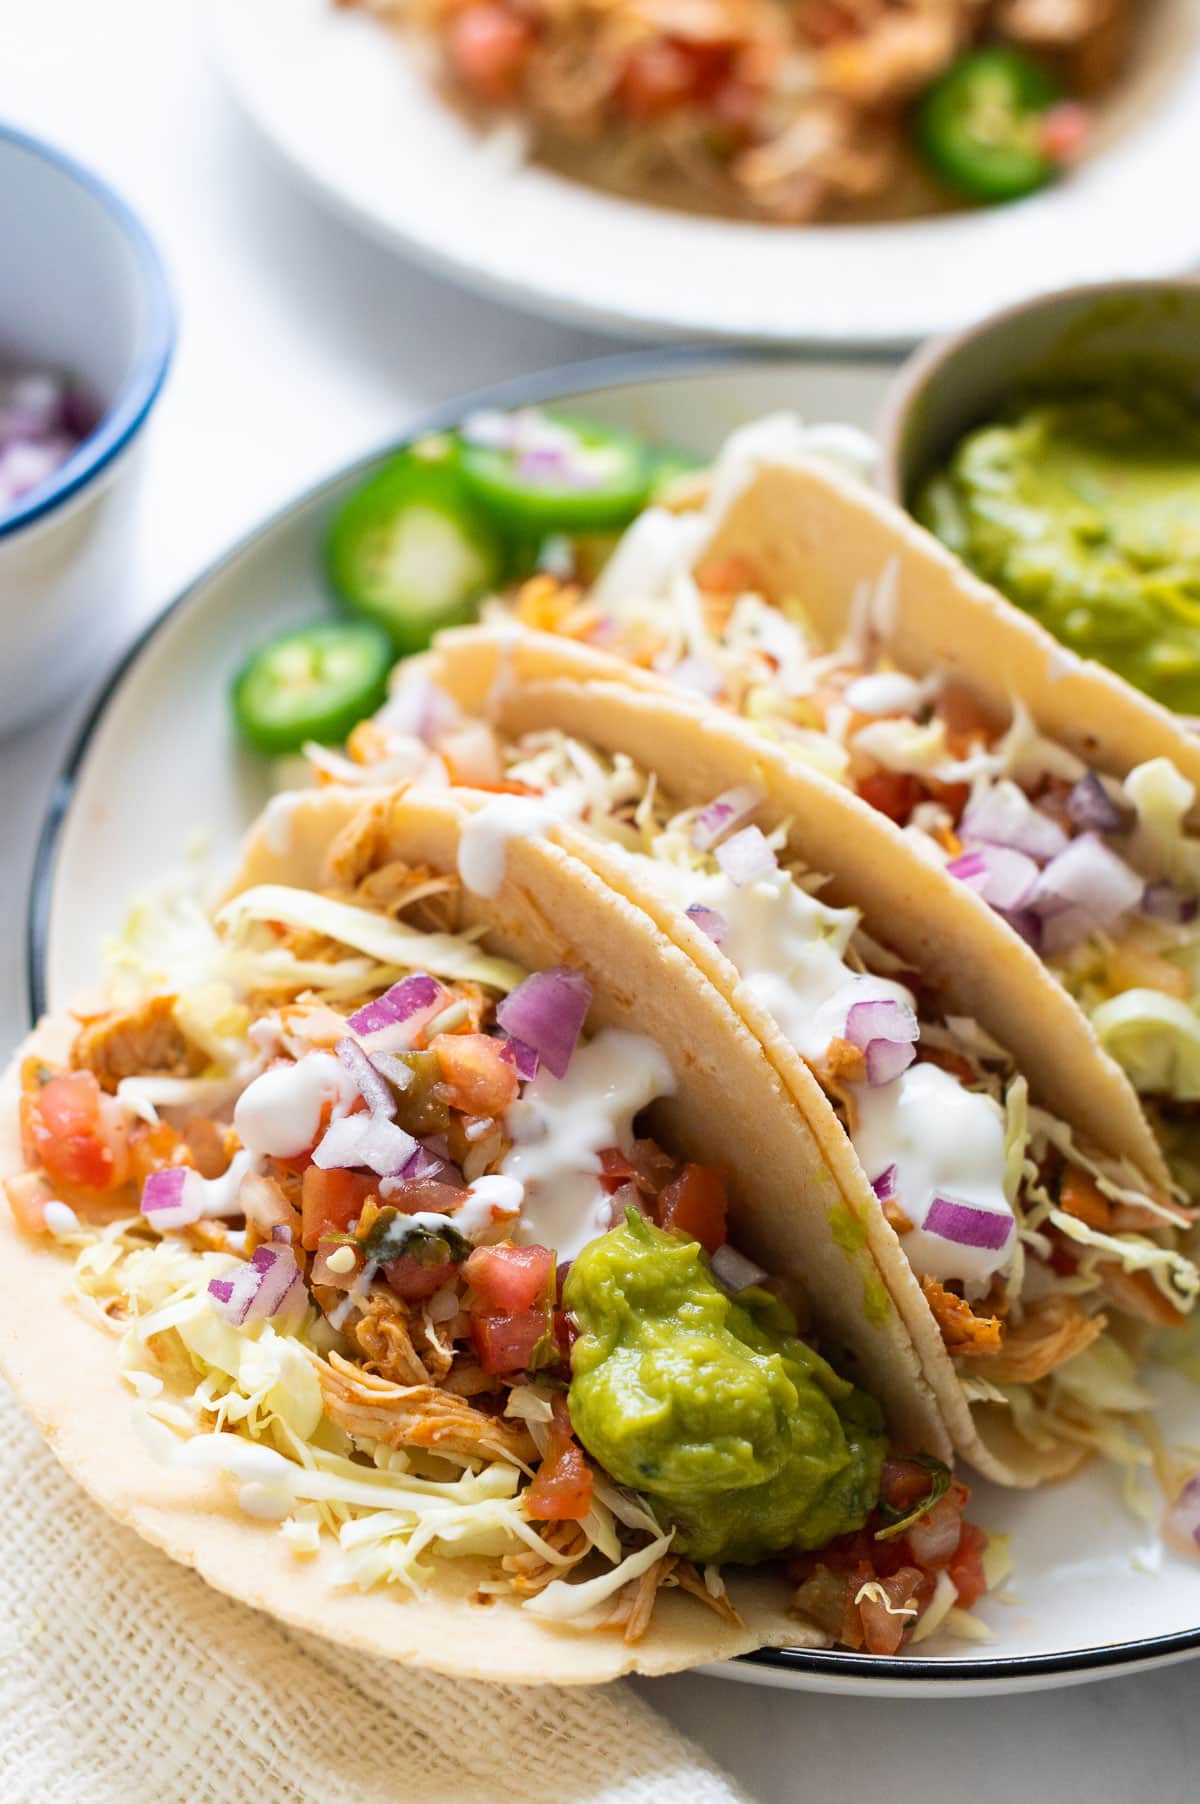 Instant Pot shredded chicken tacos served with pico de gallo, cabbage, guacamole and sour cream on a plate.